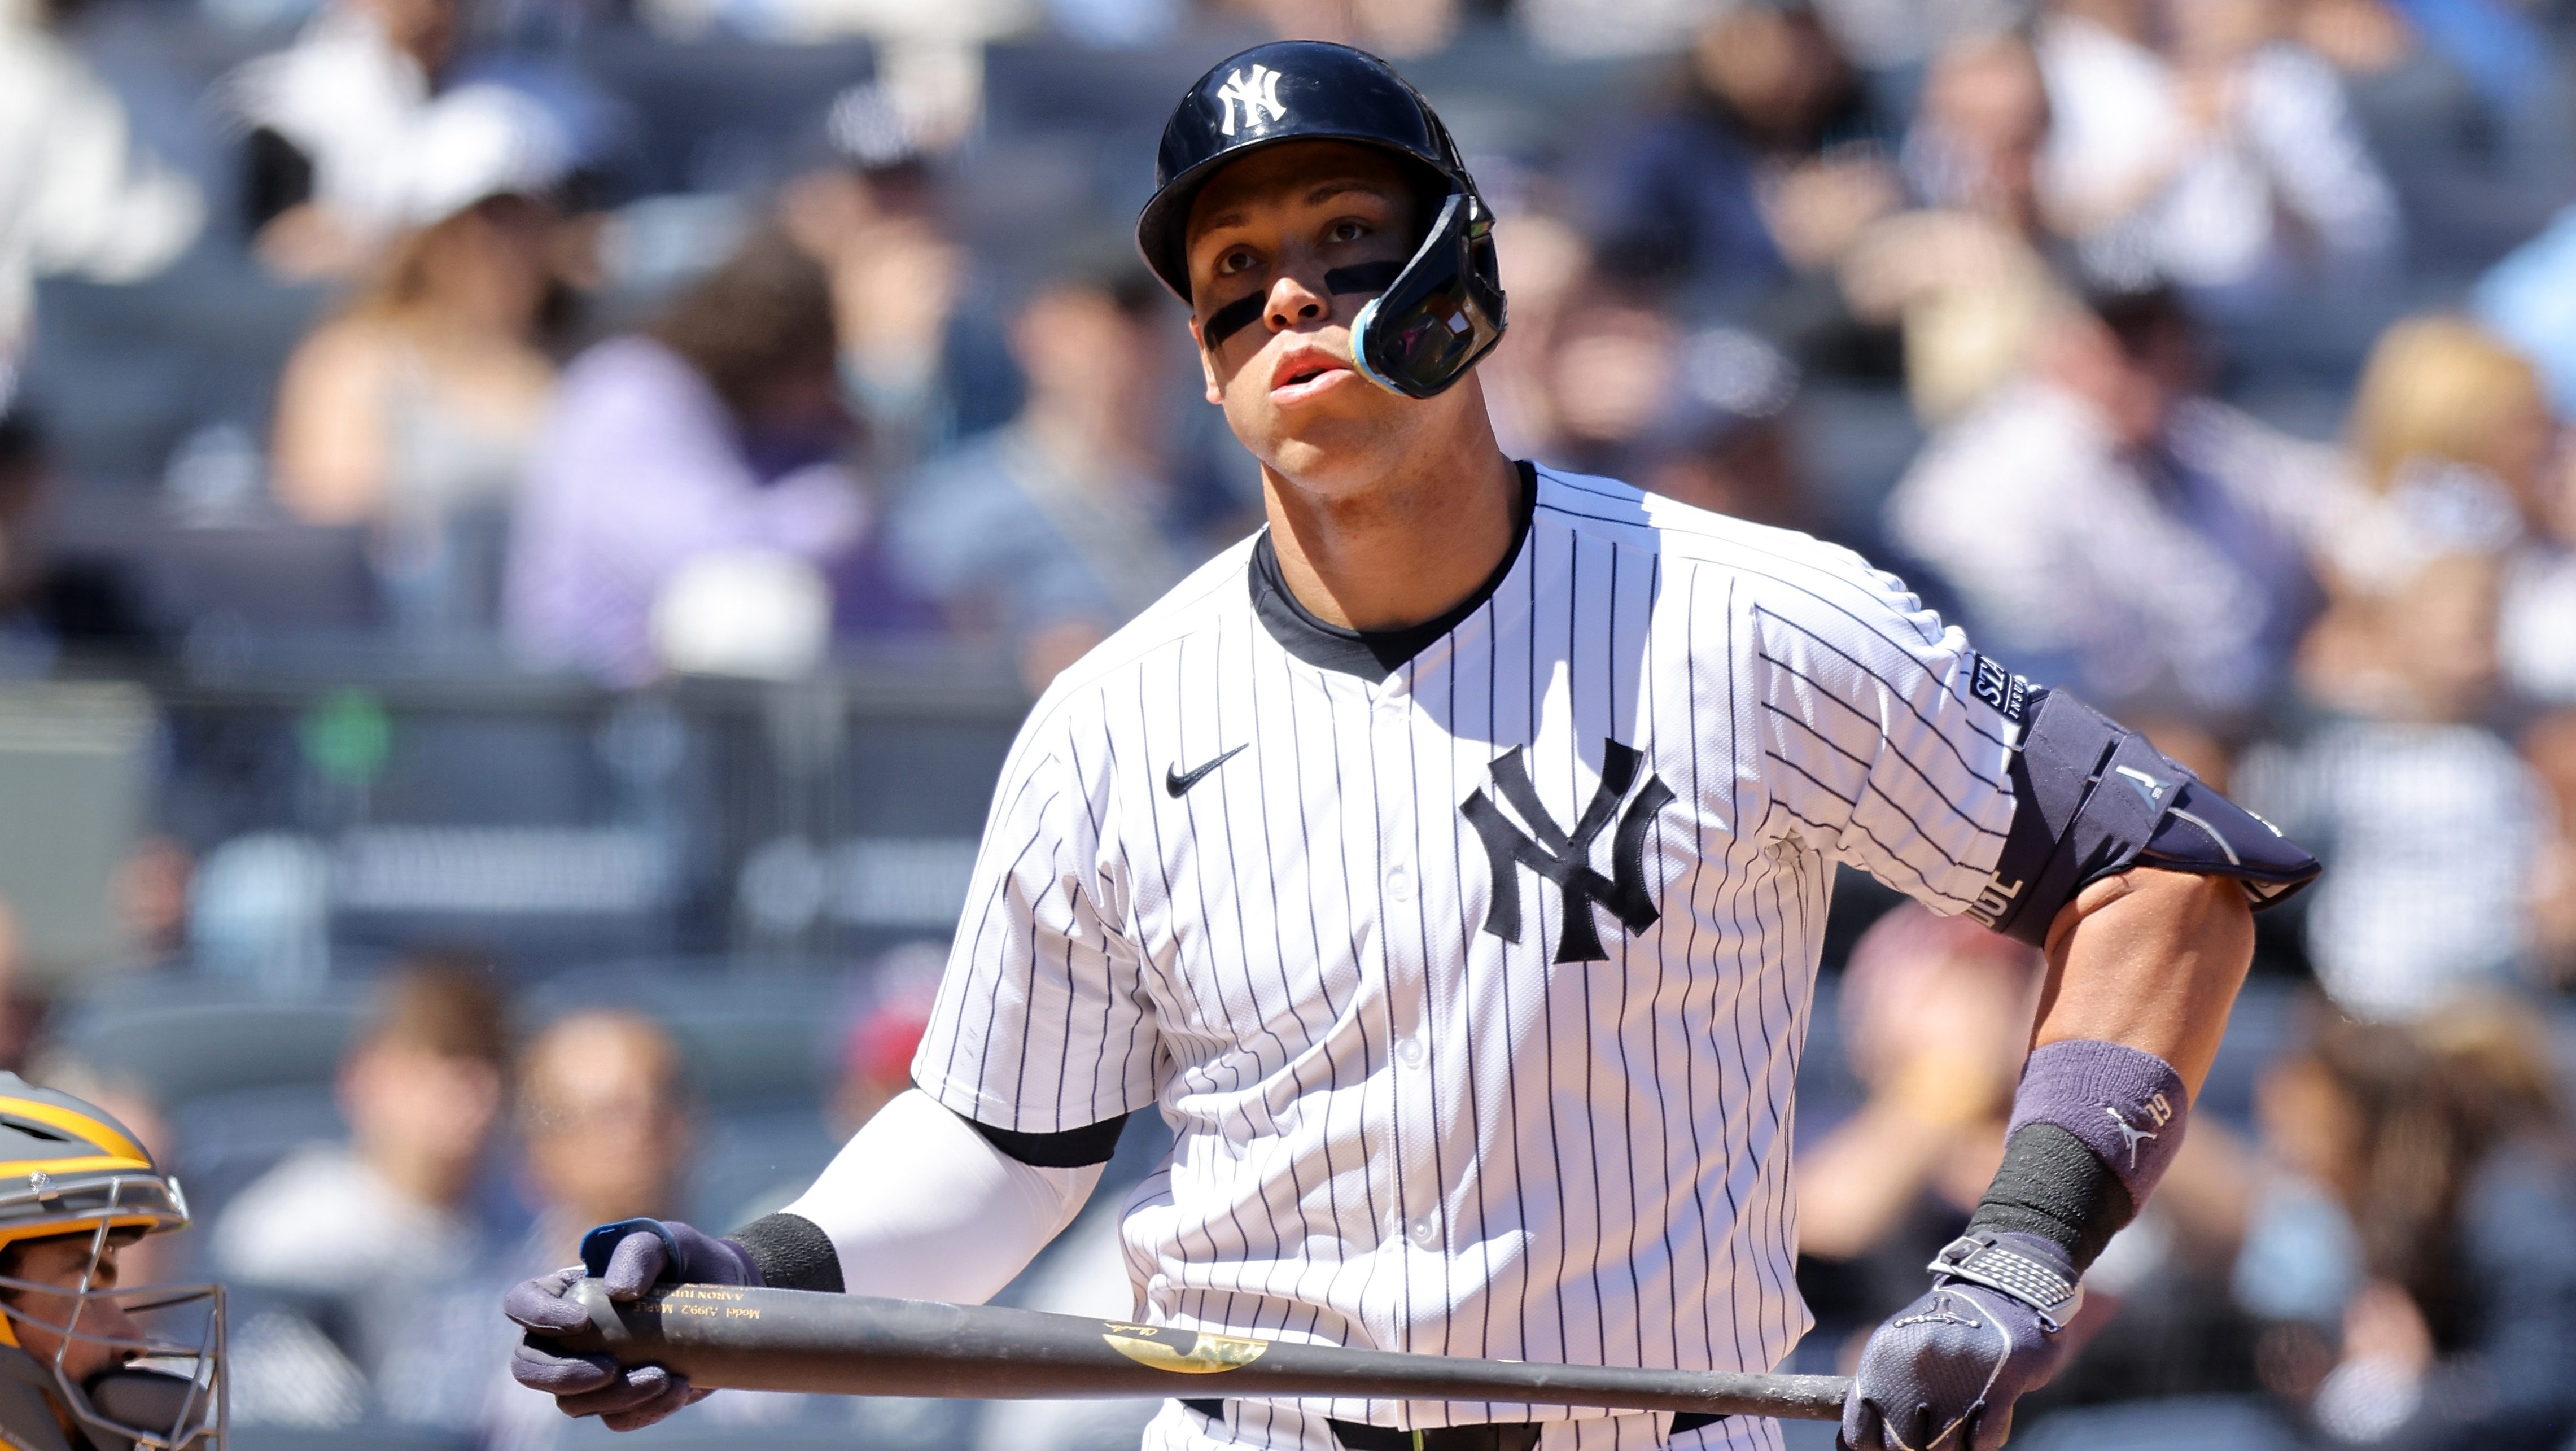 Yankees’ Aaron Judge Featured On ’10 Biggest Disappointments’ List